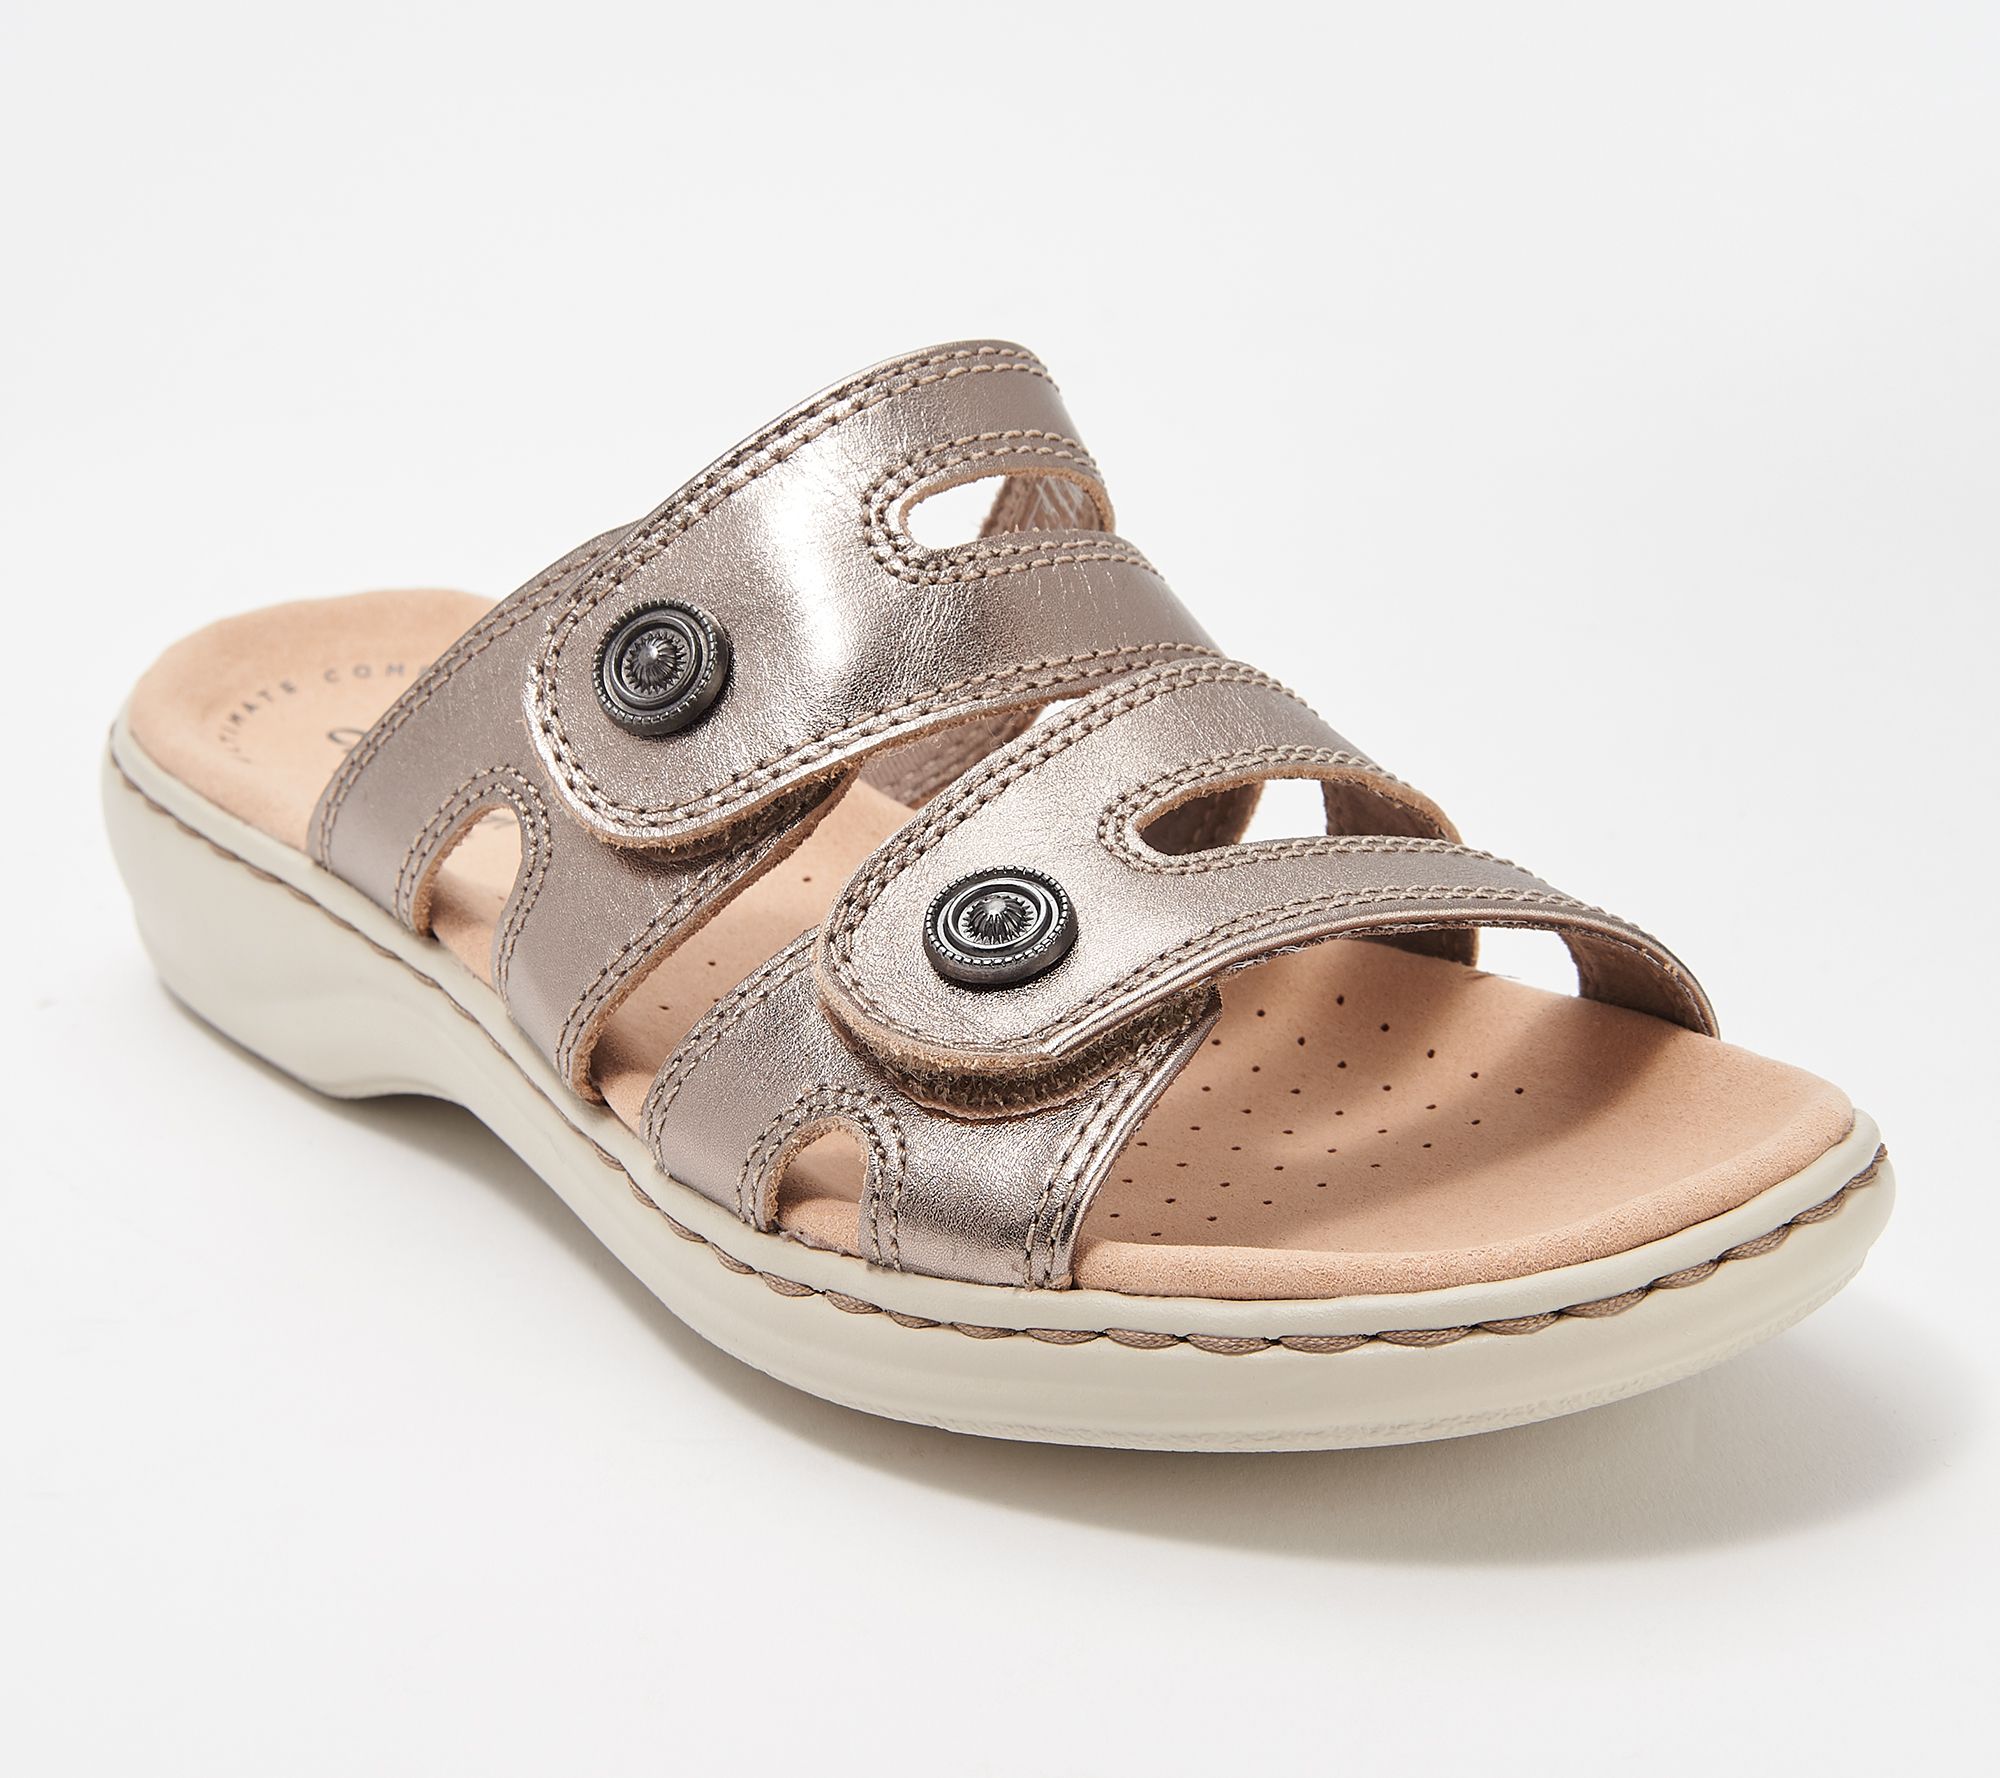 Clarks Womens Collection Leather Slide Sandals- Leisa Nala $68 TINI {&}